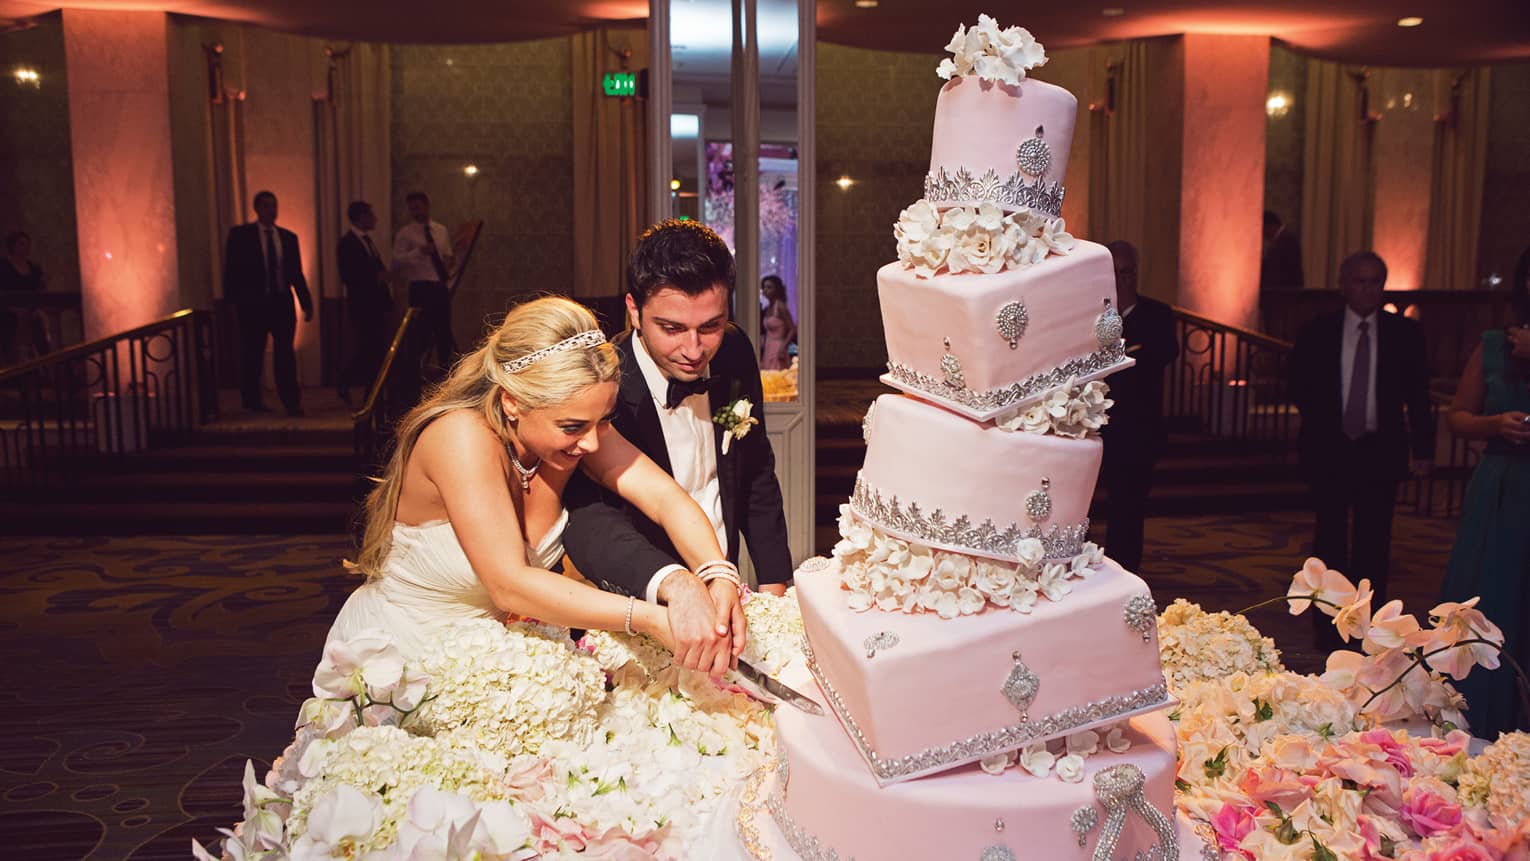 Bride and groom cut large, five tiered pink layer cake at wedding reception